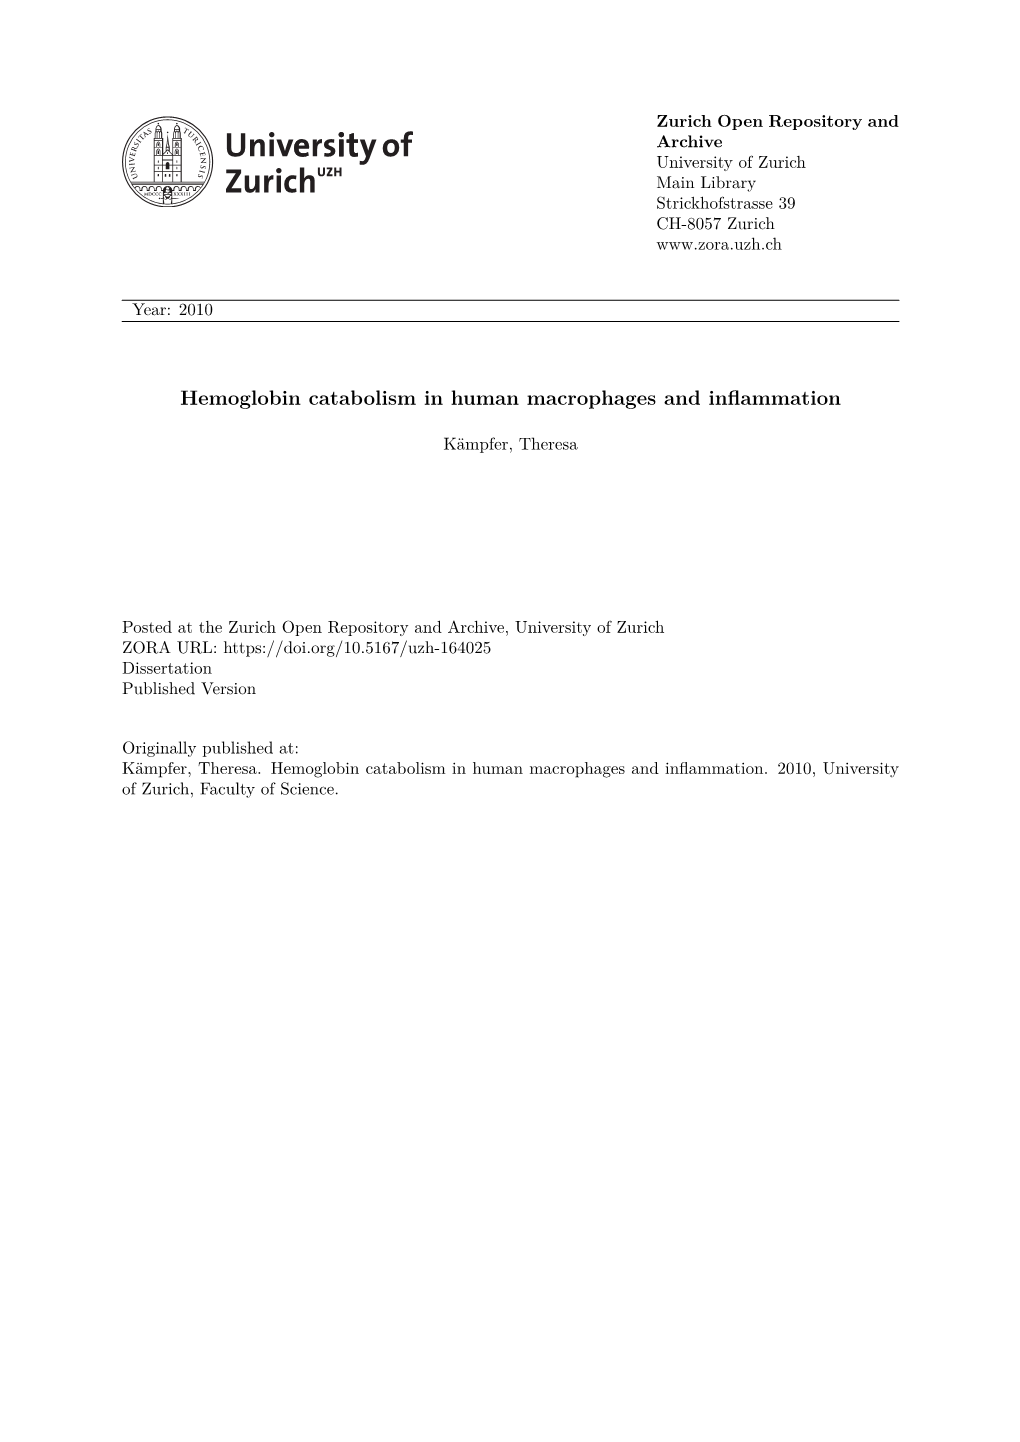 Hemoglobin Catabolism in Human Macrophages and Inflammation